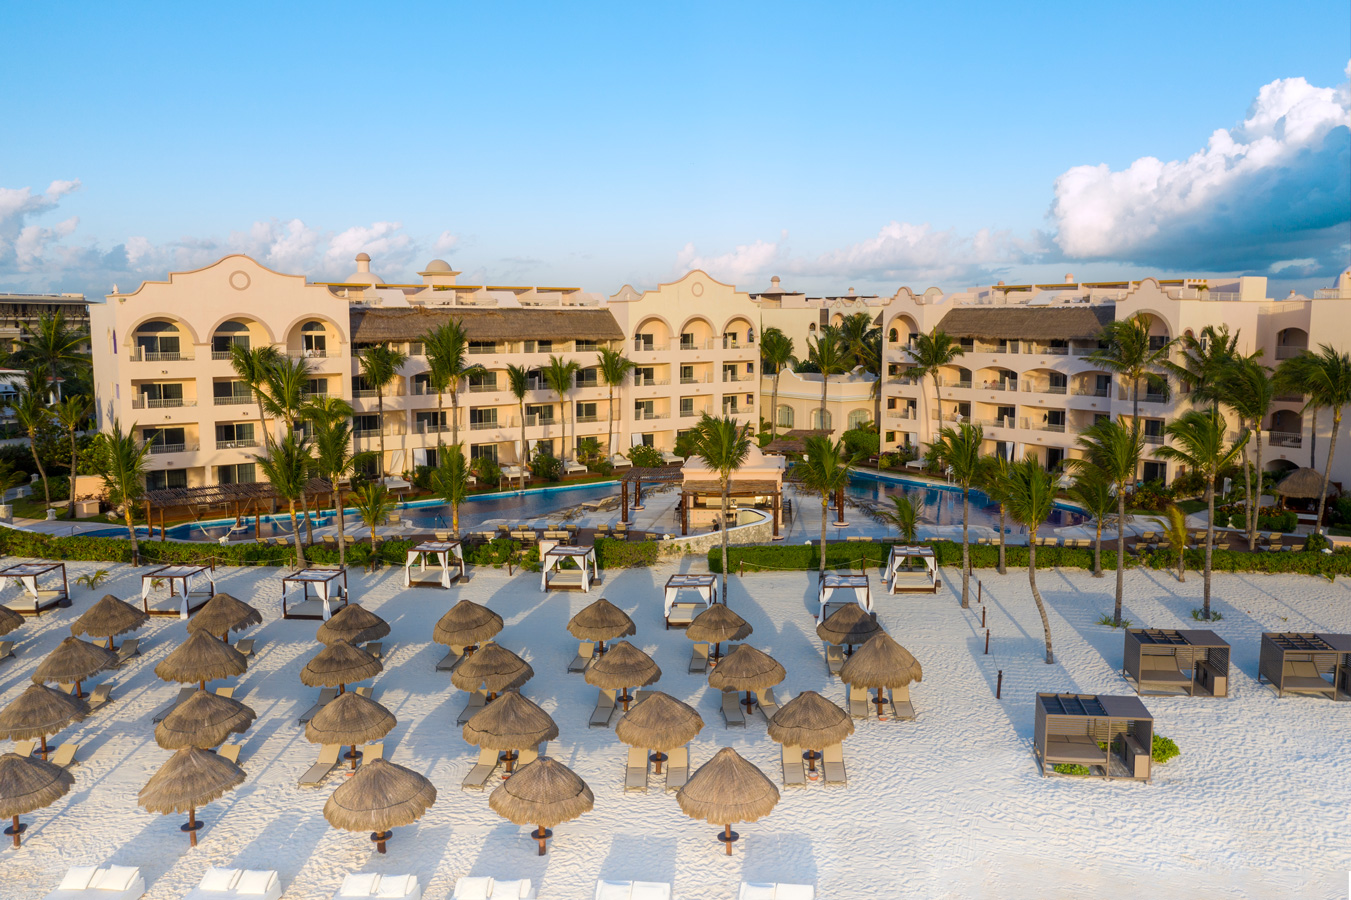 Excellence Riviera Cancun is the best resort in the Riviera Maya